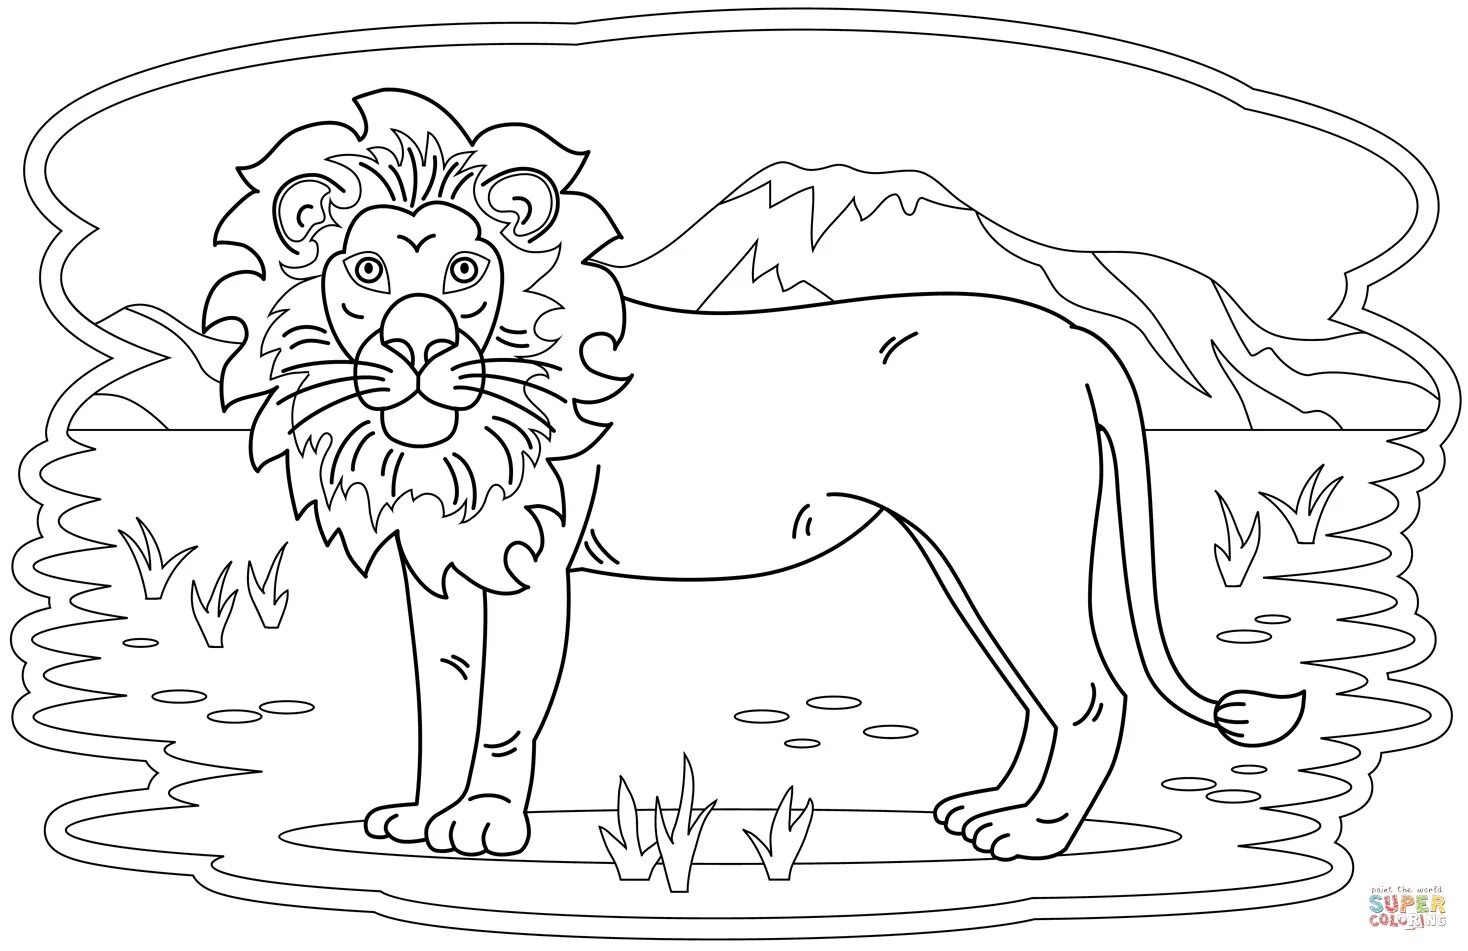 A funny lion coloring book for 3-4 year olds